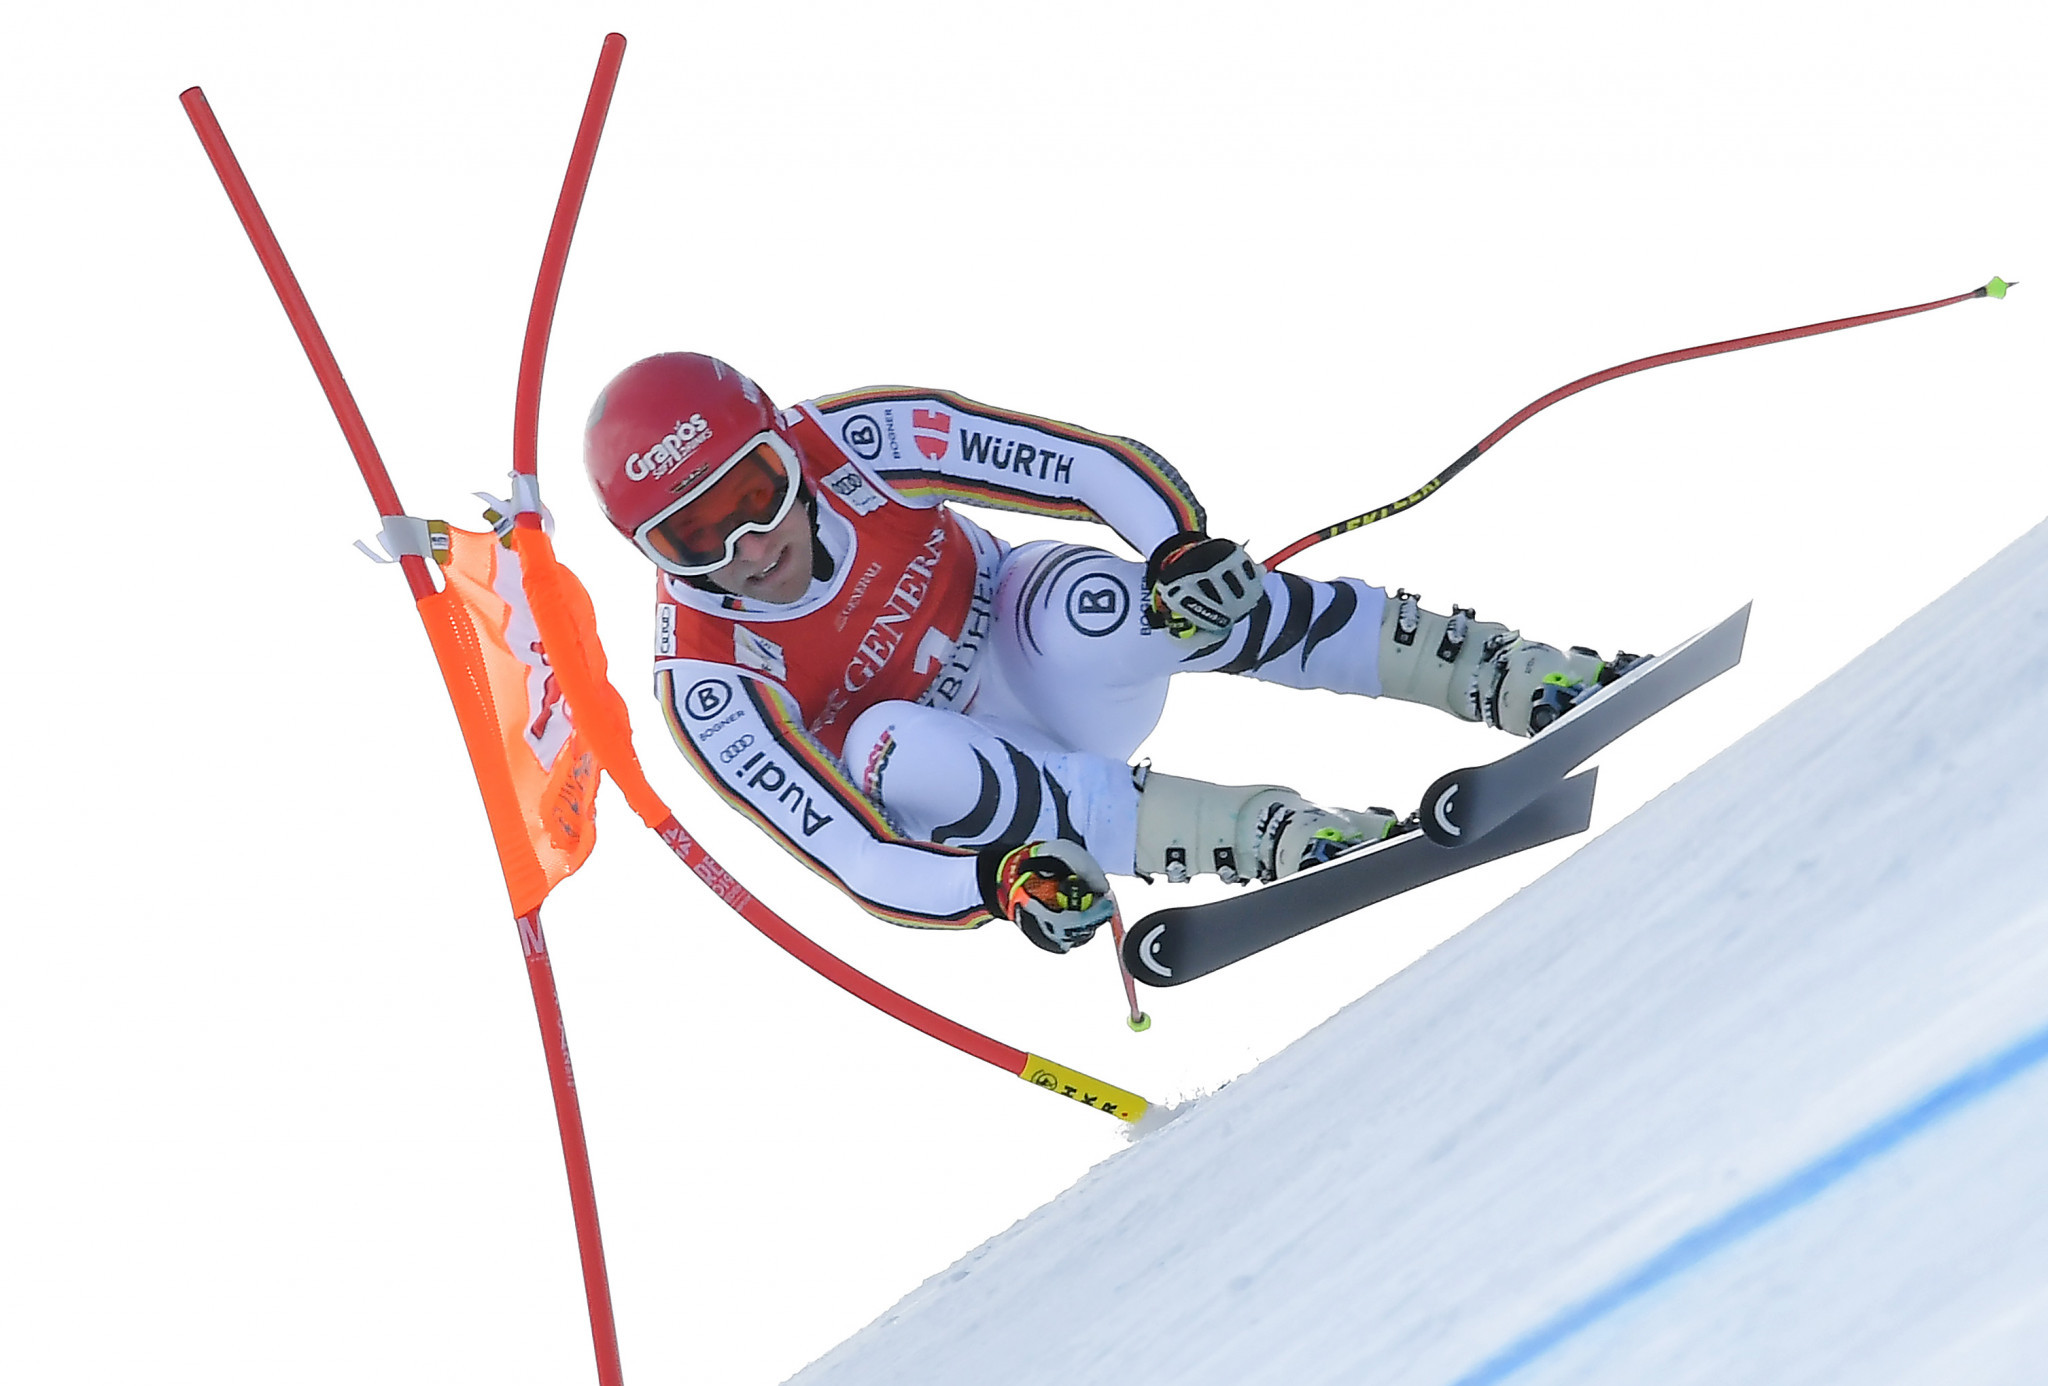 Josef Ferstl won the men's super-G in Kitzbuehel to claim only his second World Cup podium ©Getty Images